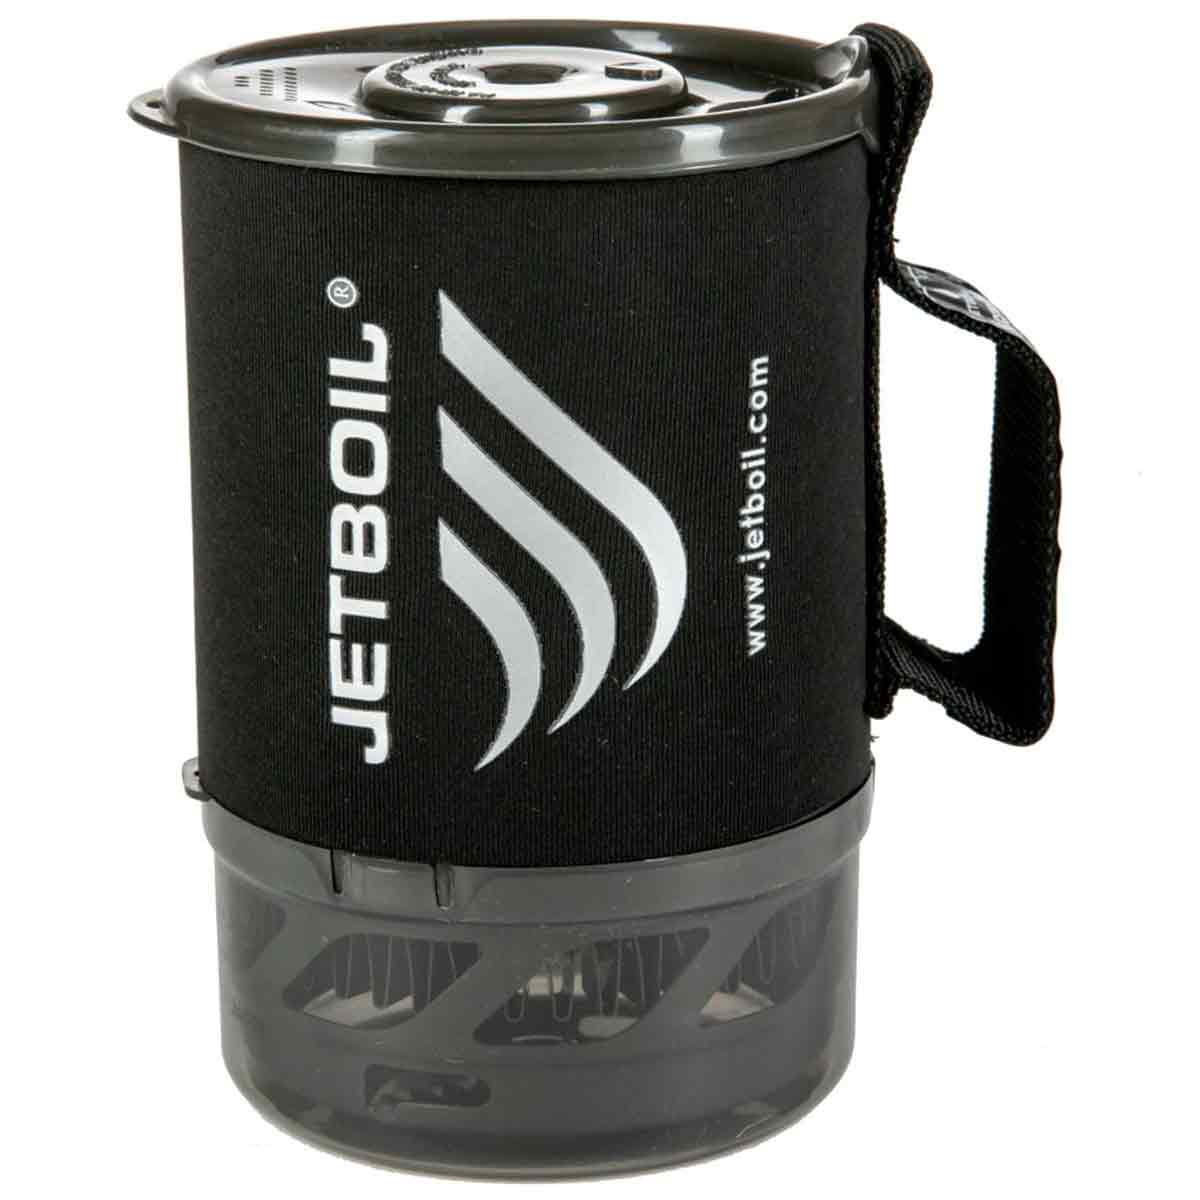 Jetboil MicroMo Carbon MCMCB Cooking Stove - John Bull Clothing